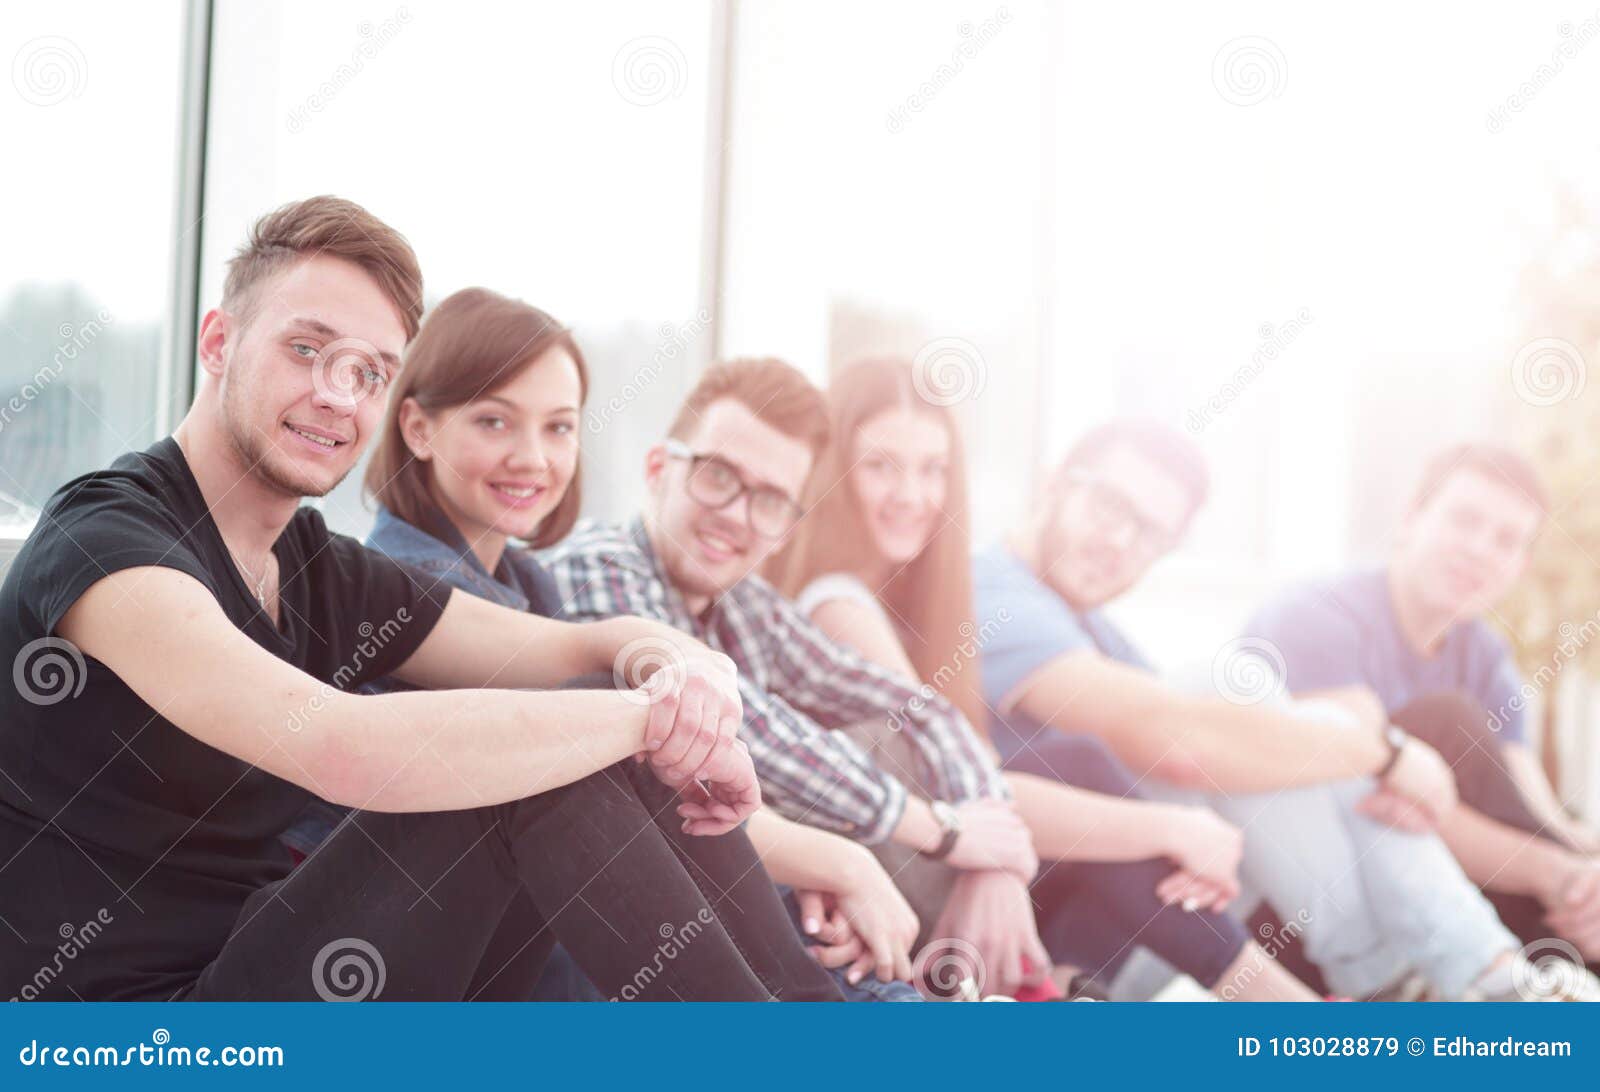 Funny Young People Smile and Having Fun Stock Image - Image of cheerful,  sill: 103028879